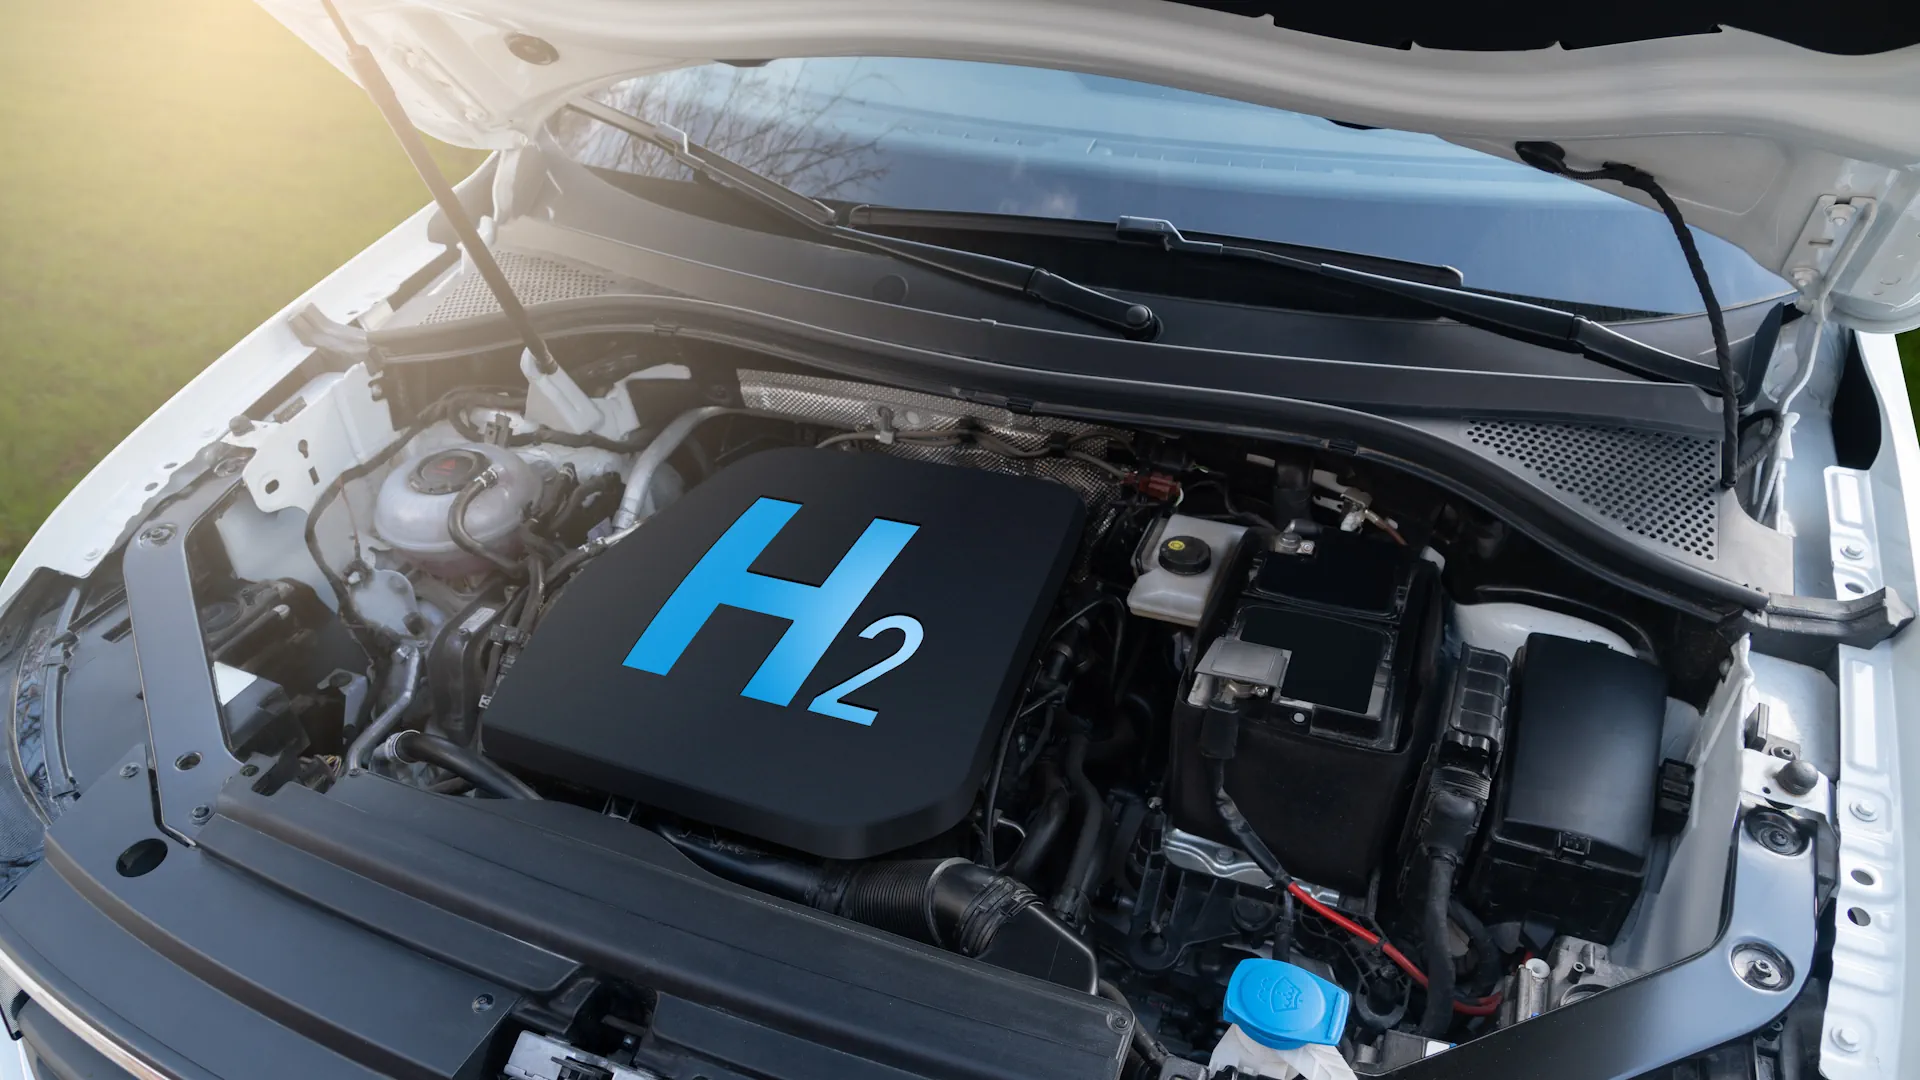 Hydrogen is the next big thing – BMW, Honda and Hyundai are working on ‘hydrogen’ cars